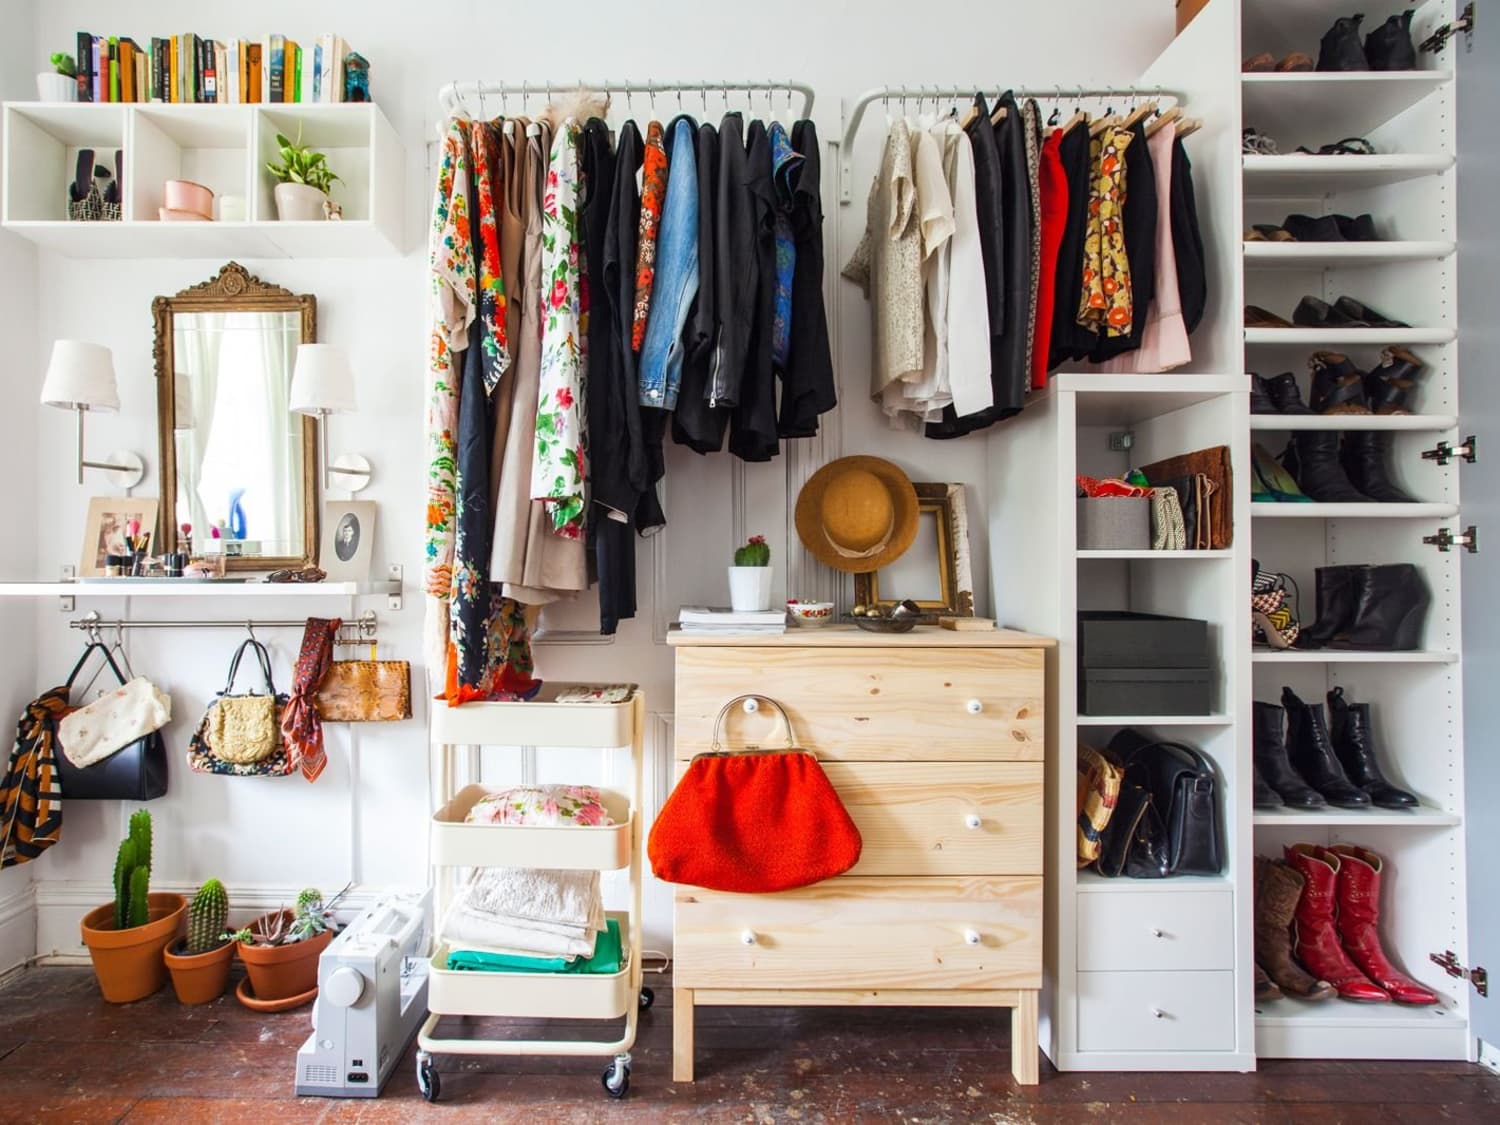 How To Store Clothes Without Wardrobes: 25 Ideas - DigsDigs